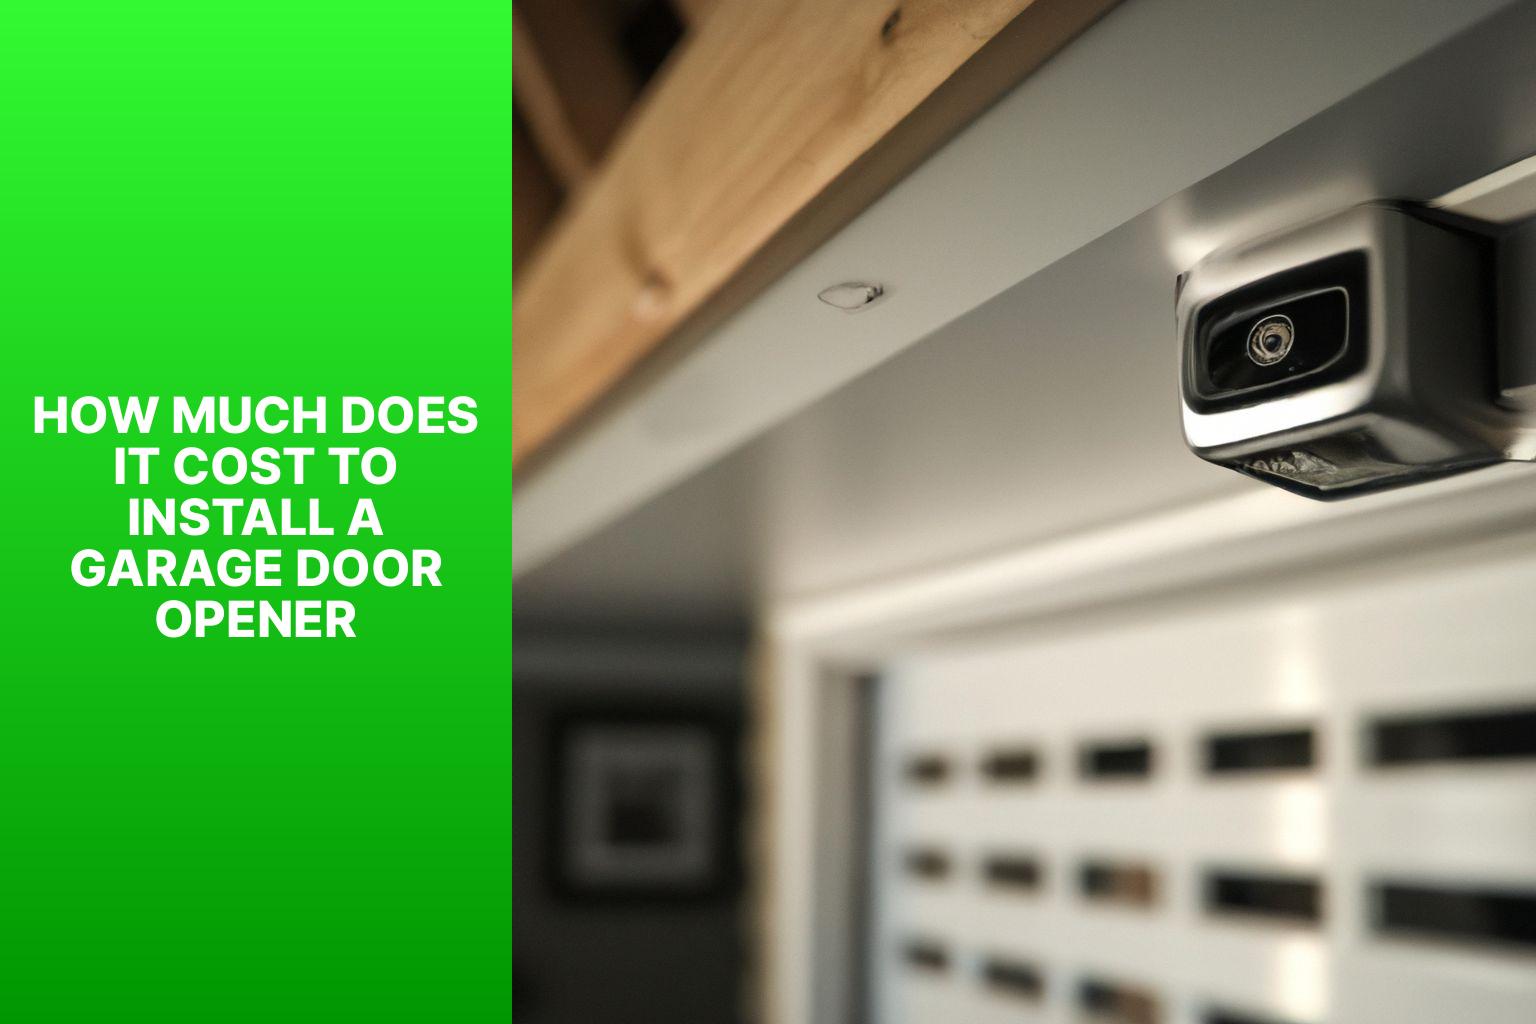 How Much Does It Cost to Install a Garage Door Opener